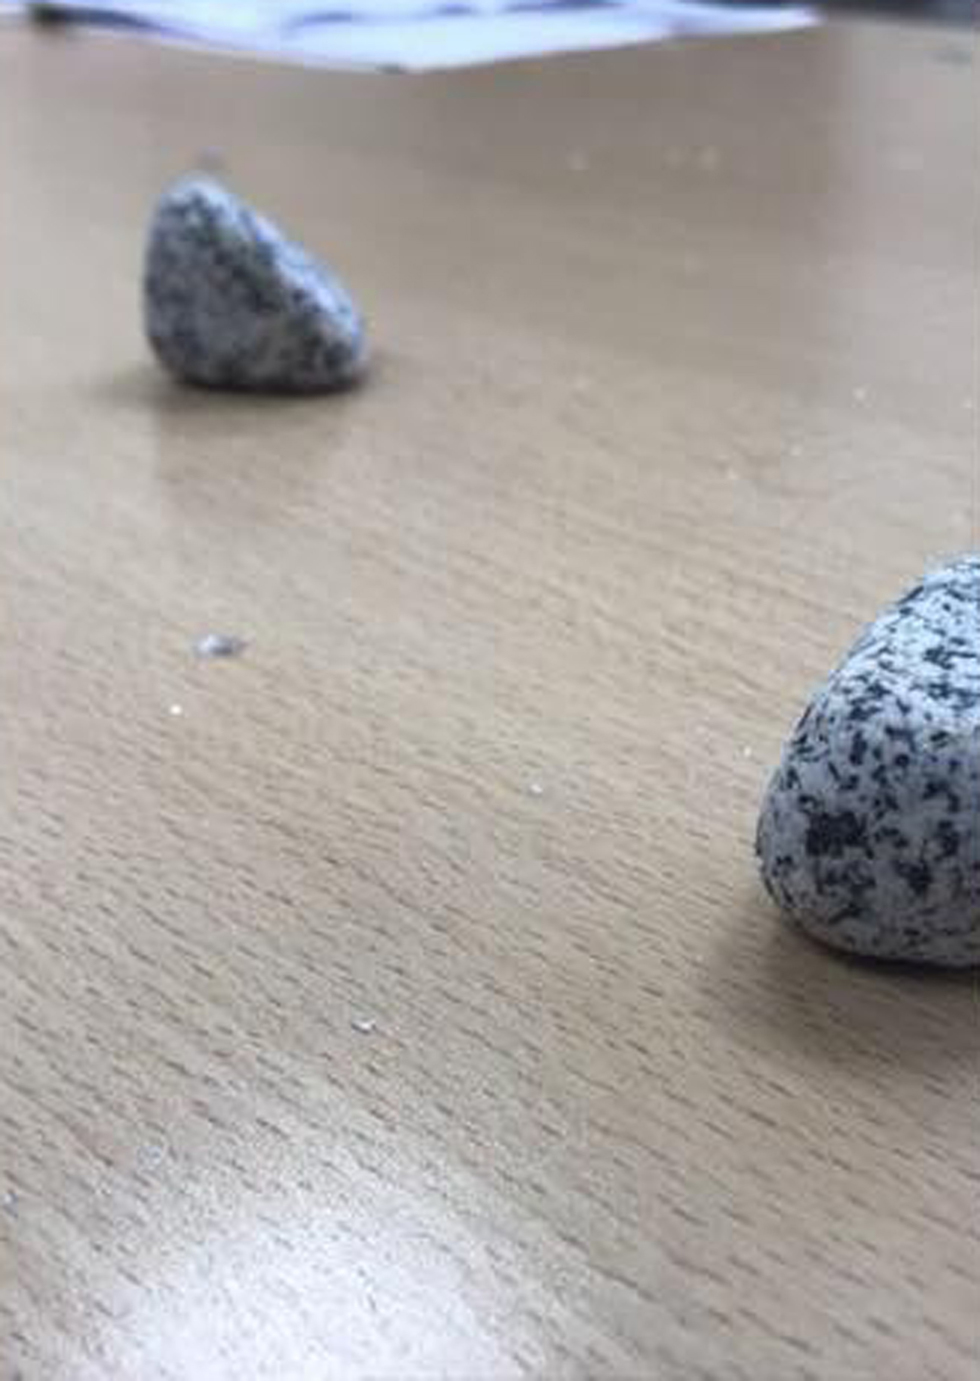 Stones thrown at Ashdod municipality building